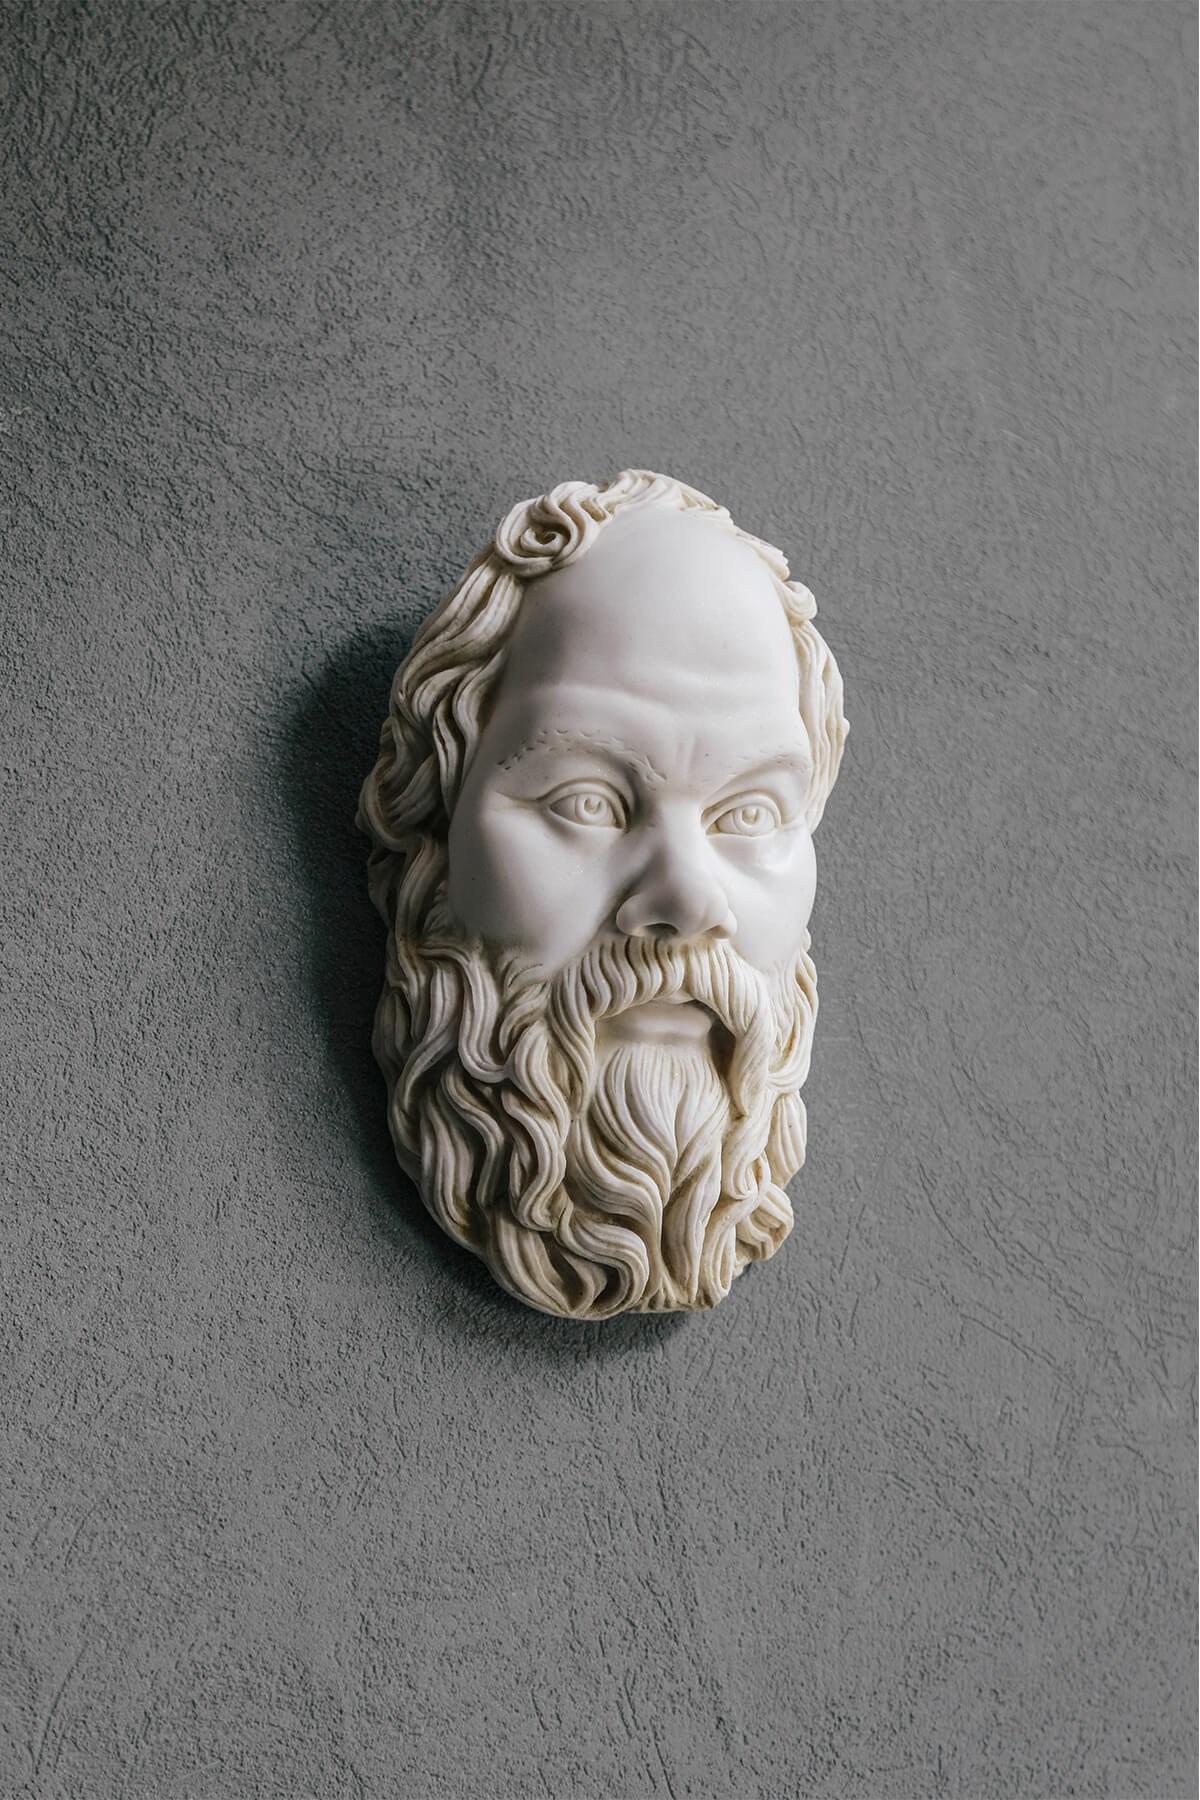 Classical Greek Socrates Mask Made with Compressed Marble Powder 'Ephesus Museum'